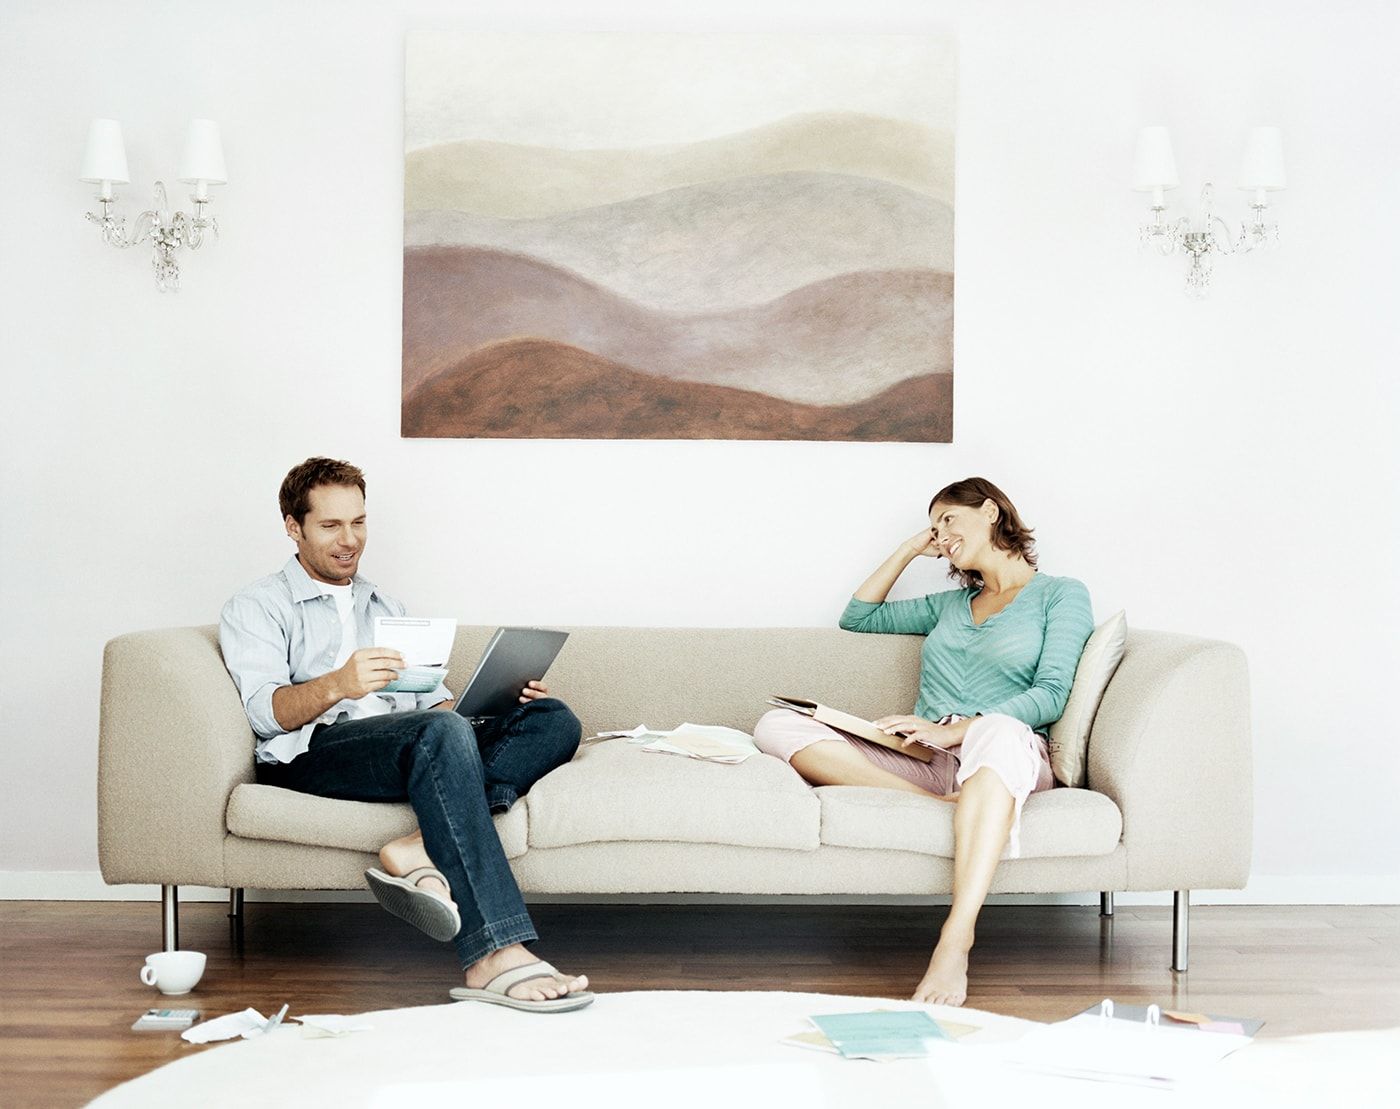 A man and a woman sitting on opposite ends of a couch, each holding financial papers.